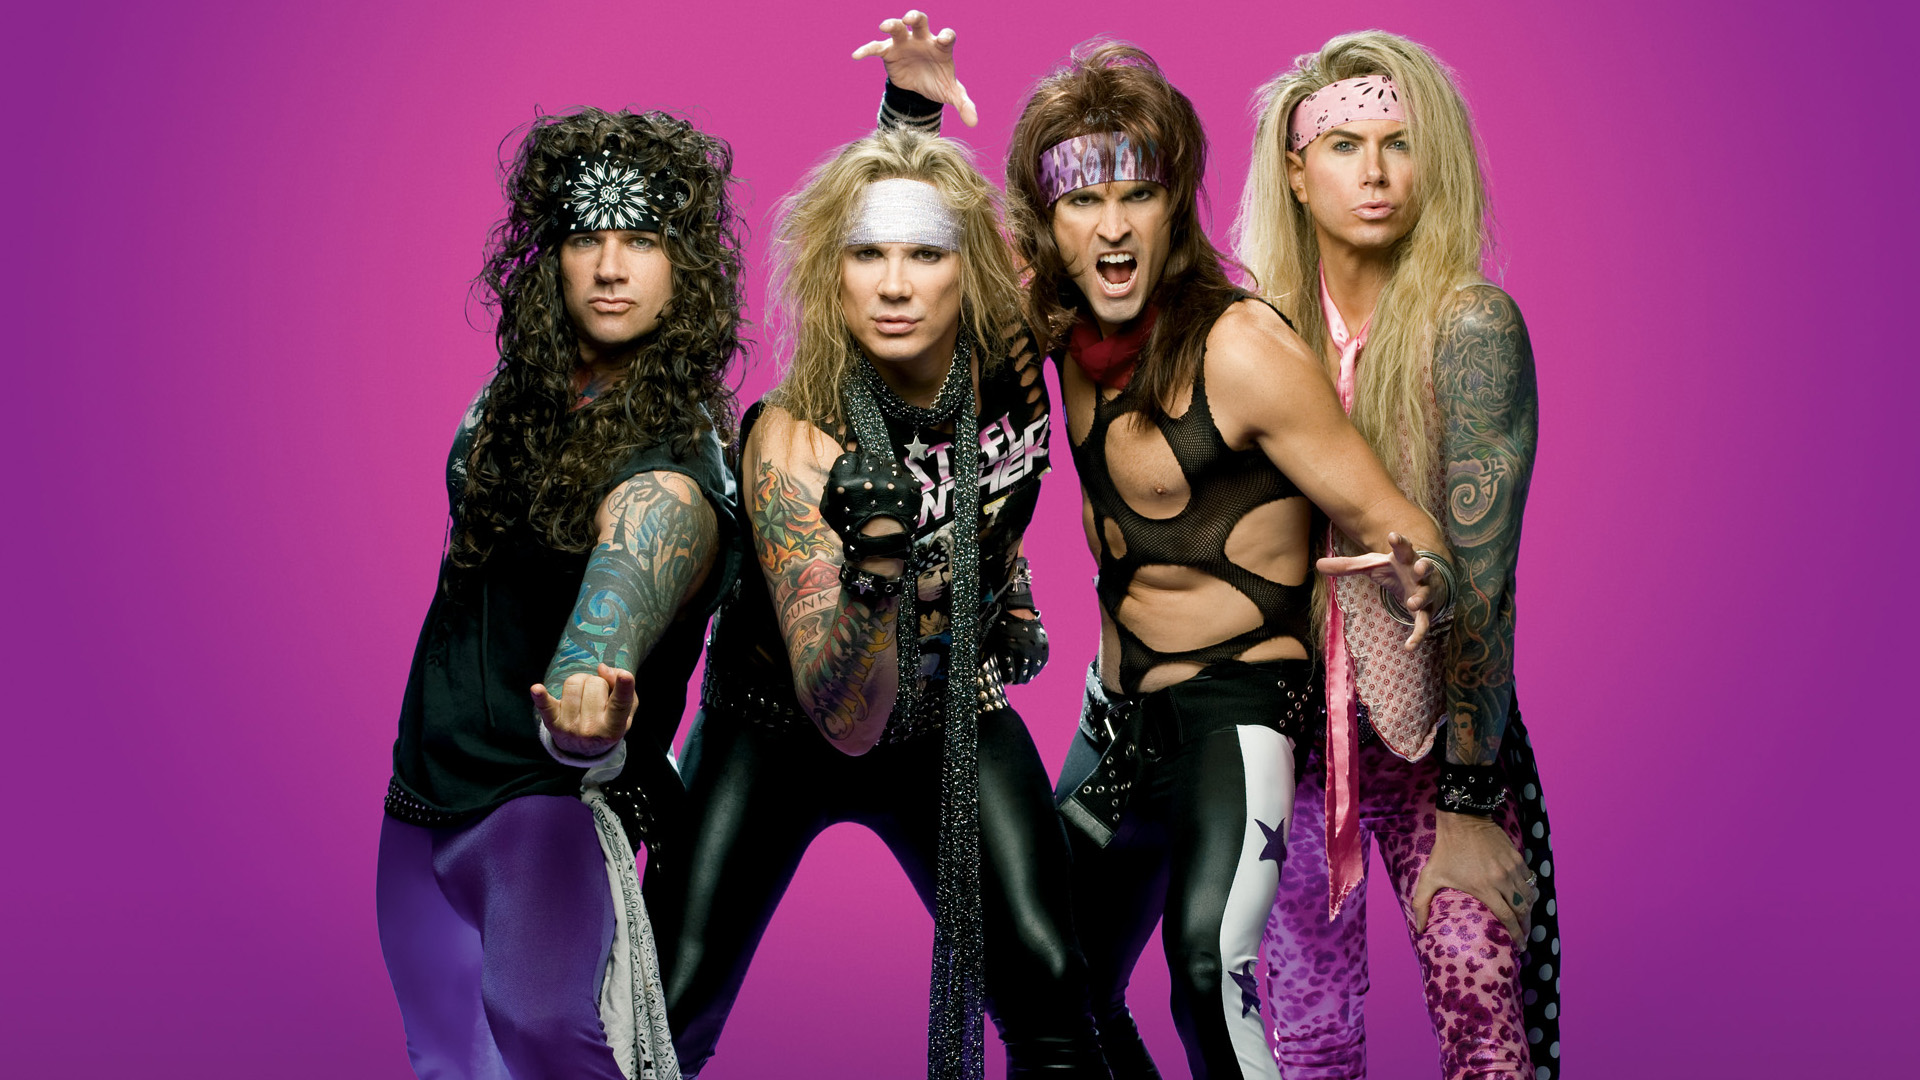 Steel Panther #3